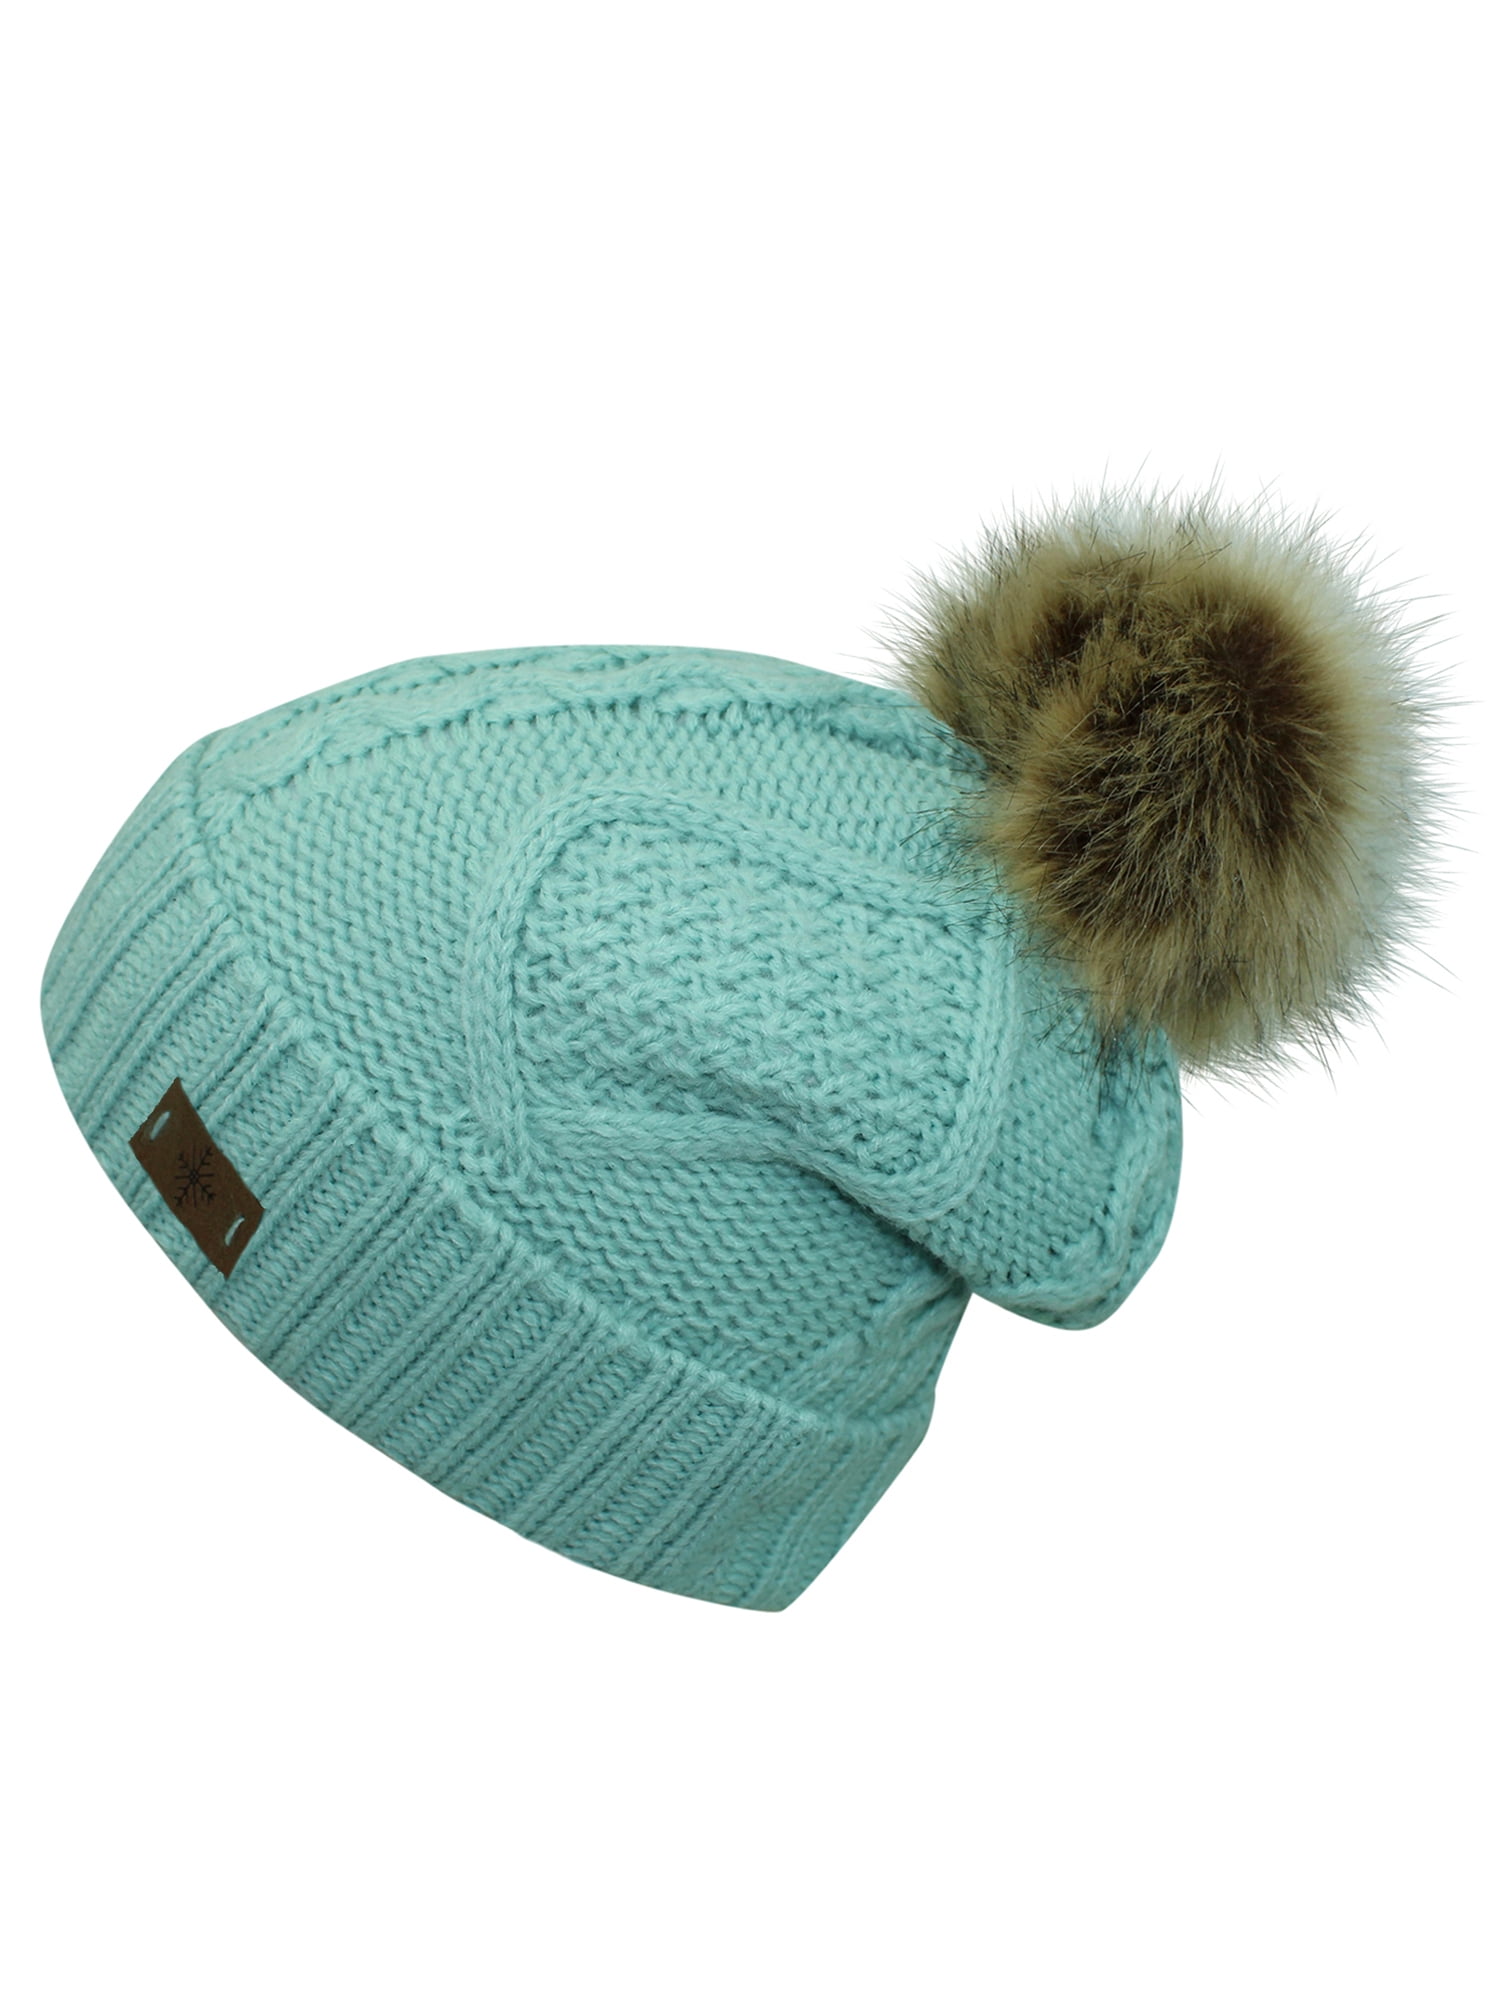 Mohair and Wool Blend Green Cable Hand Knit Hat withPom Pom for